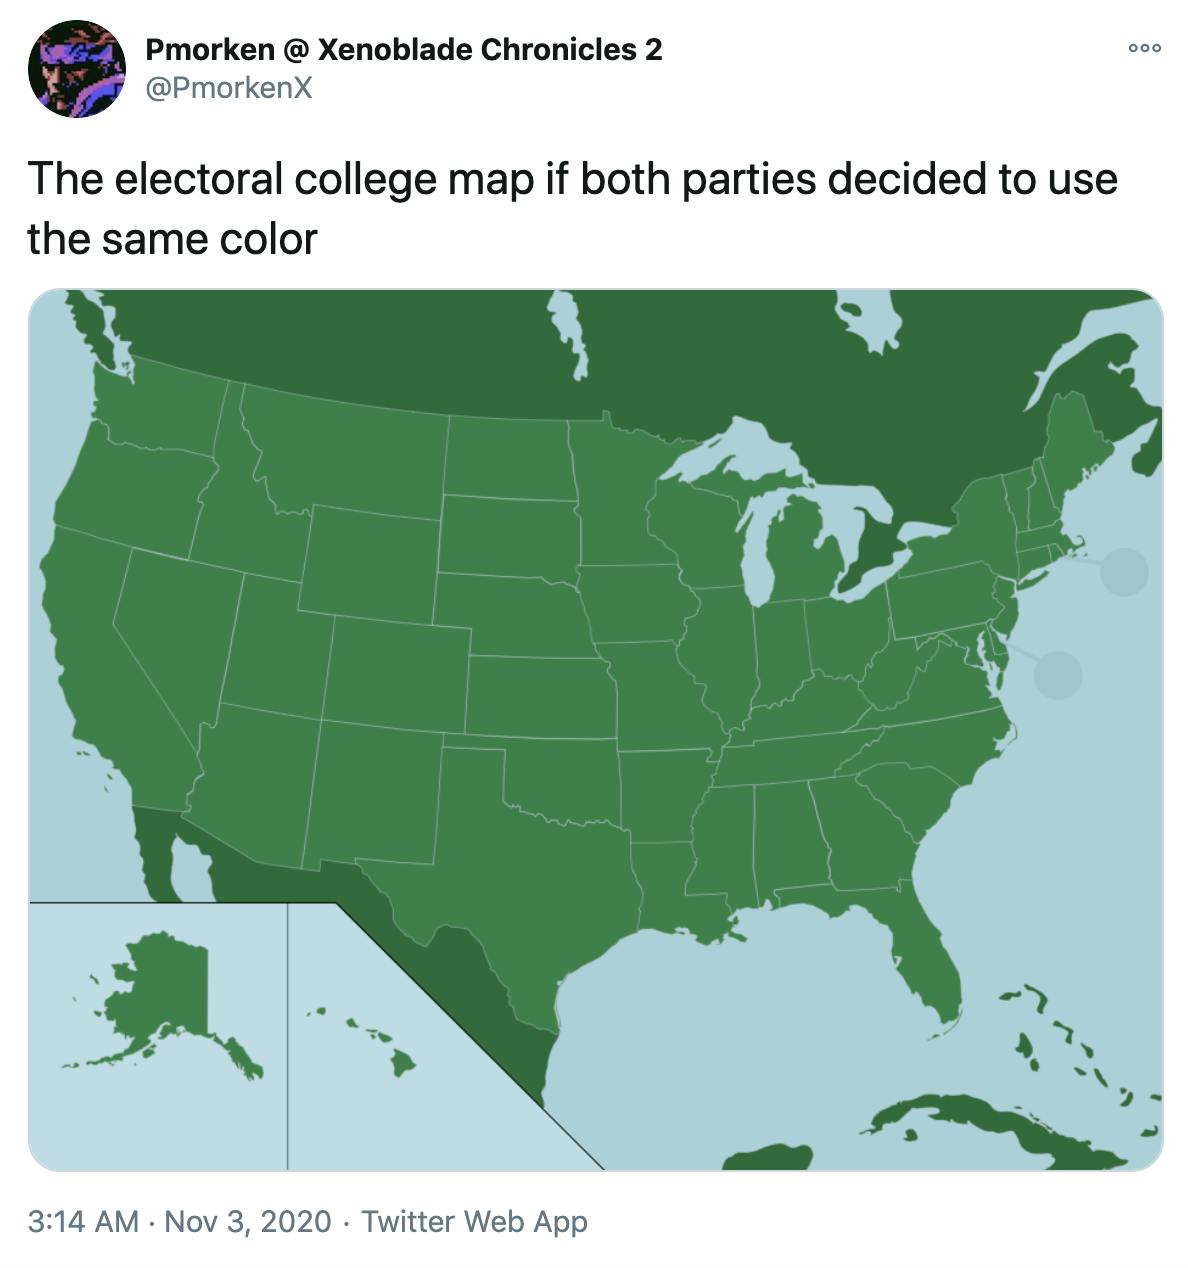 'The electoral college map if both parties decided to use the same color' entirely green unlabelled electoral college map